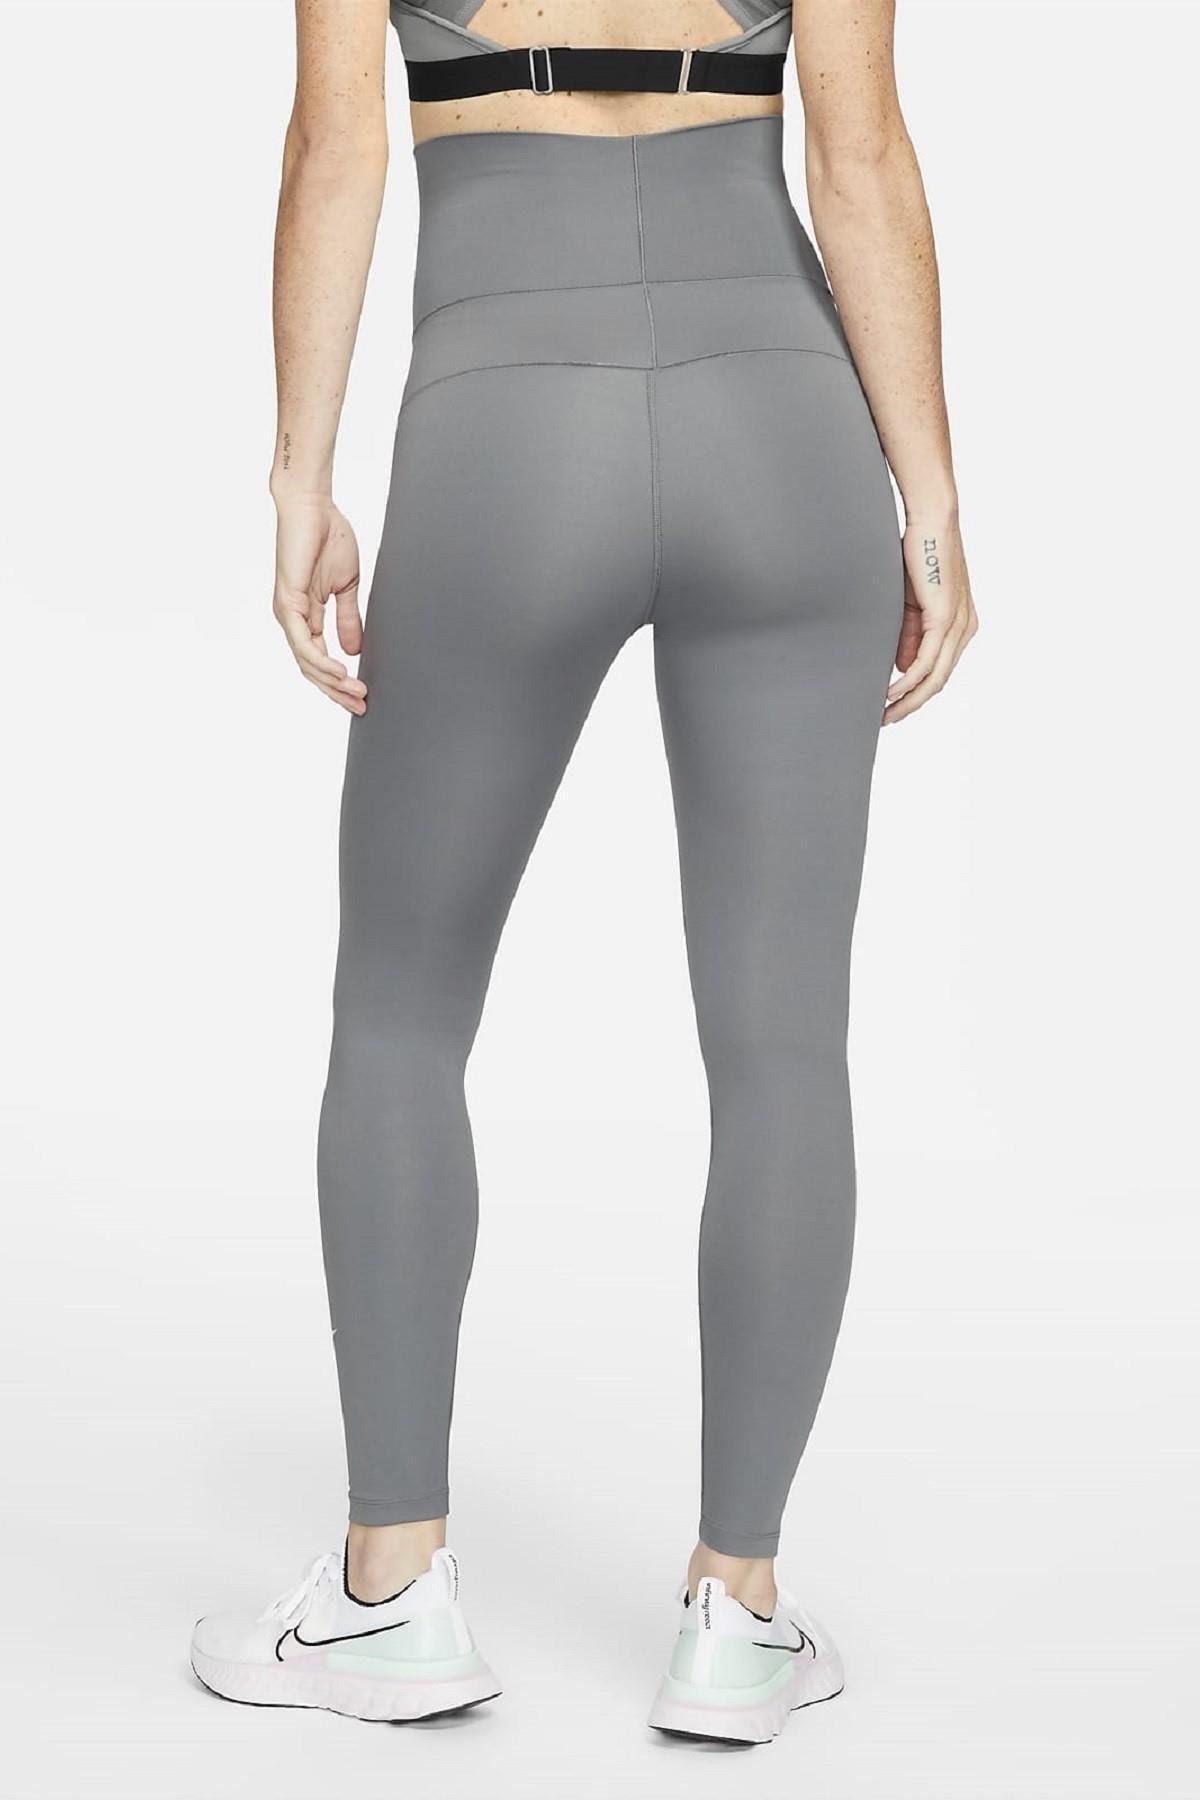 One High-Waisted Maternity Leggings by Nike Online